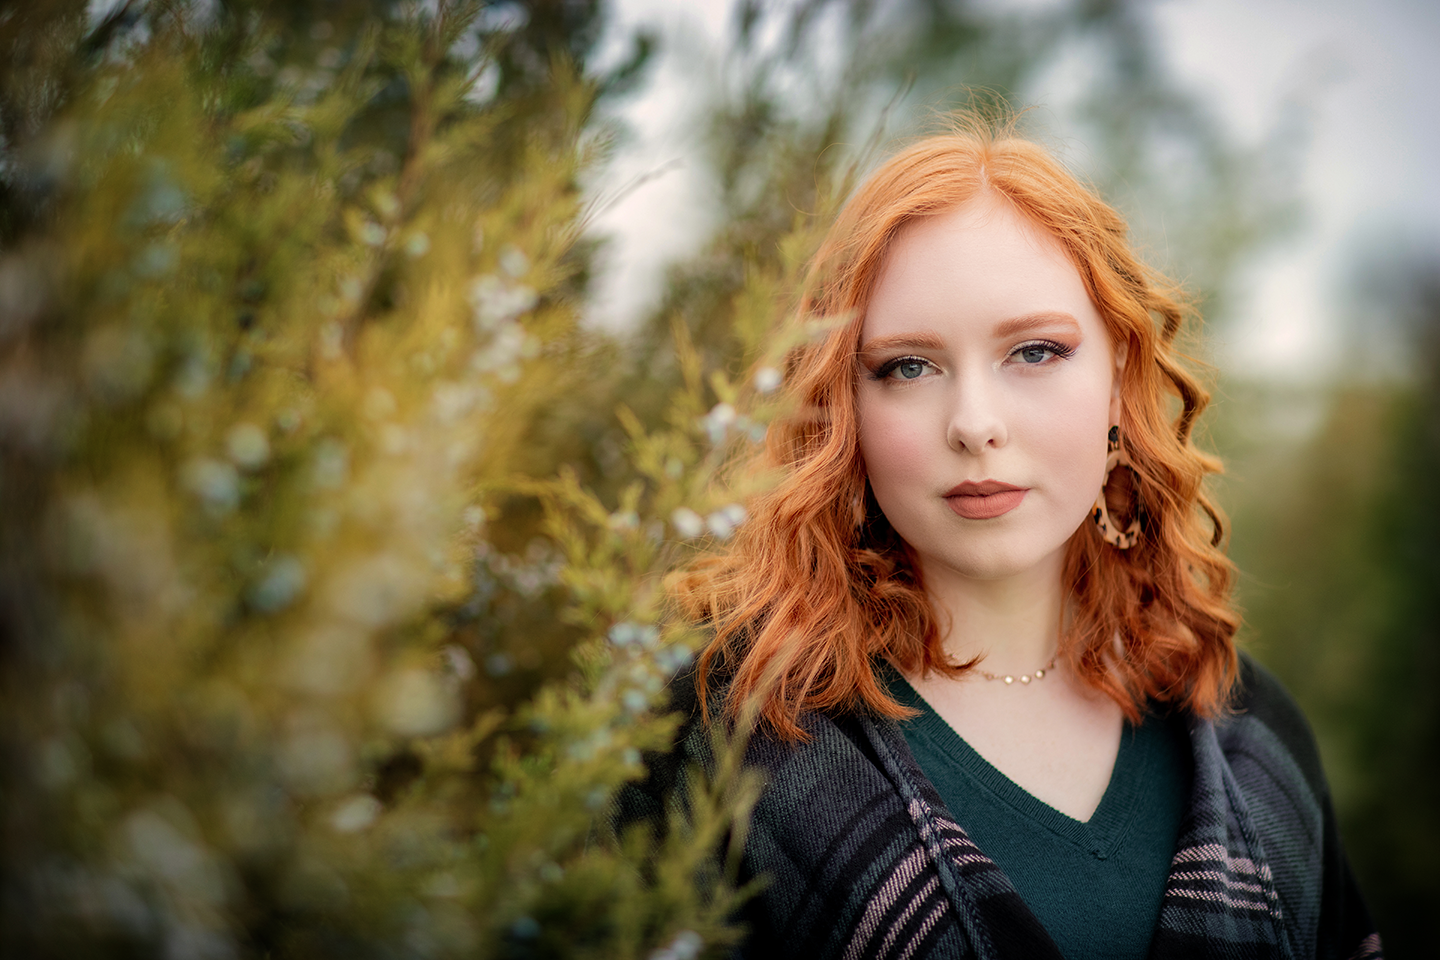 Senior picture near me. senior graduate with red hair in green pine trees with blue berries. Complimentary colors, at Norms Island in Billings Montana.